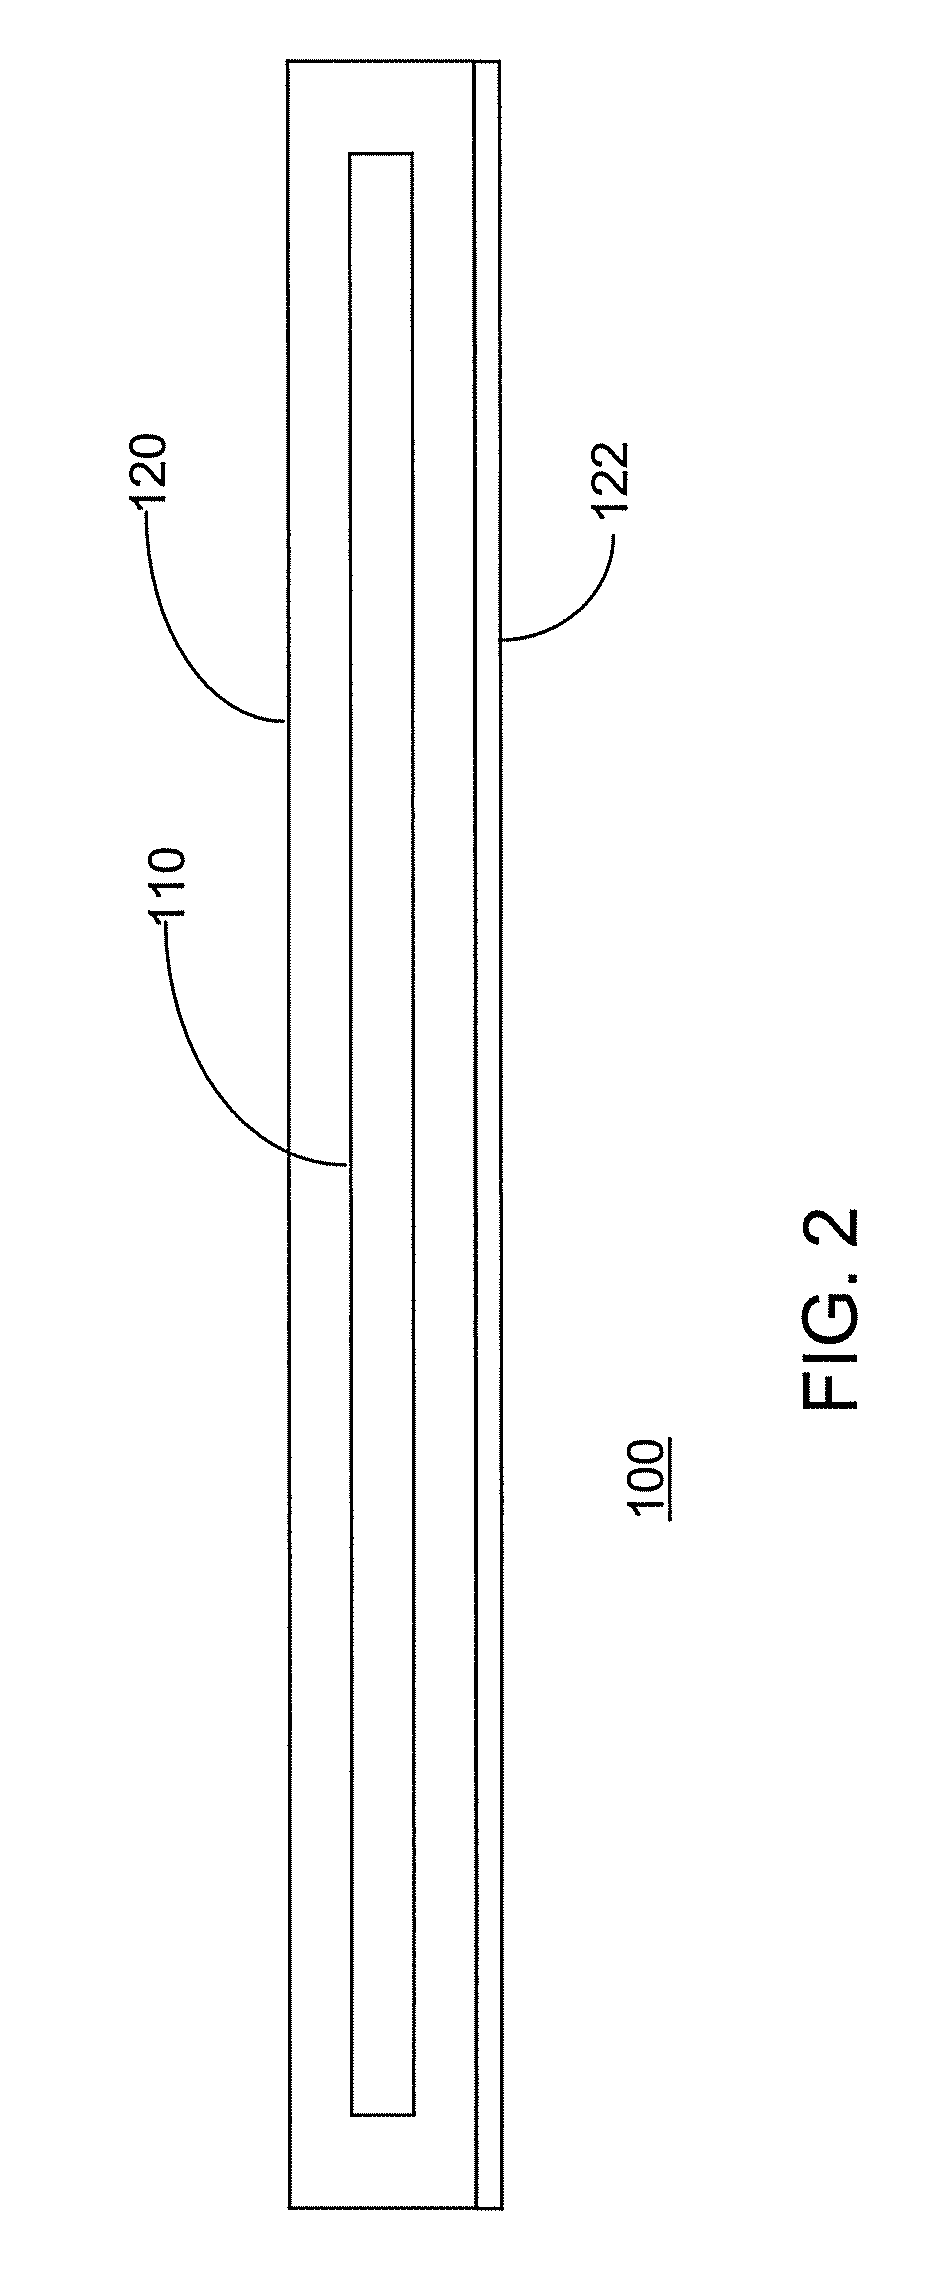 Composite grid with tack film for asphaltic paving, method of paving, and process for making a composite grid with tack film for asphaltic paving